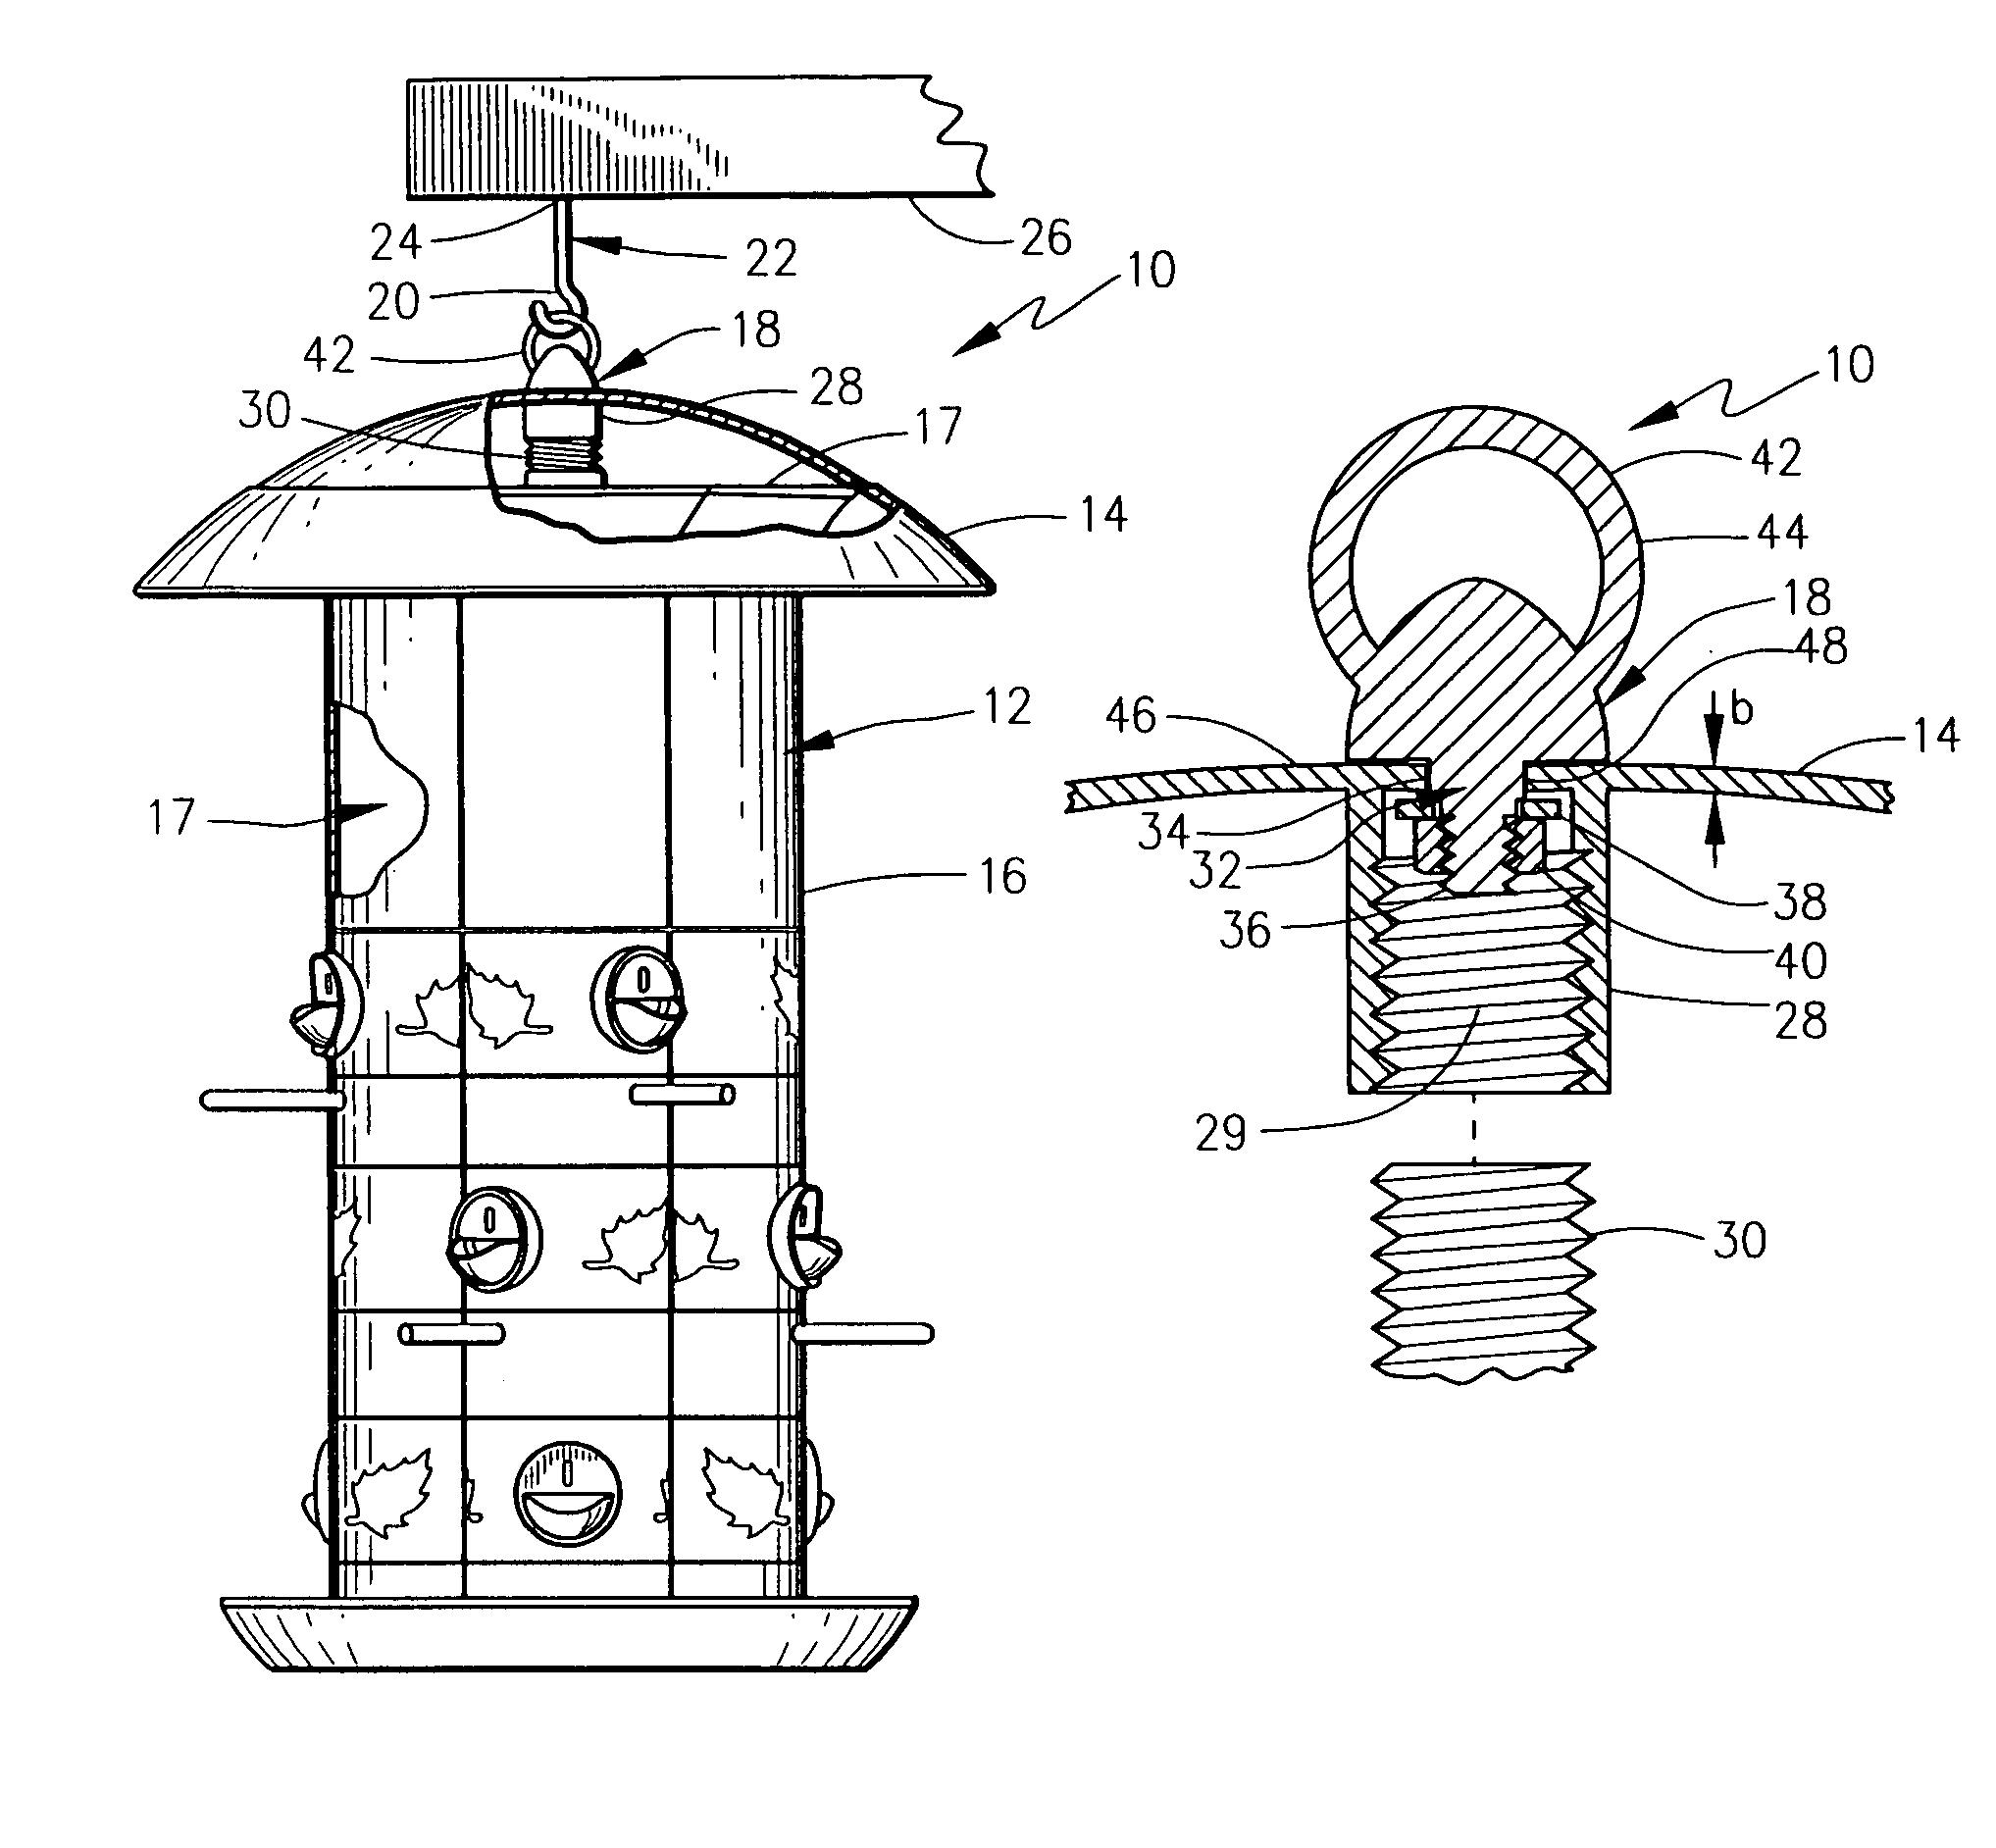 Receptacle for use in the care and maintenance of living things with swivel mount and method therefor